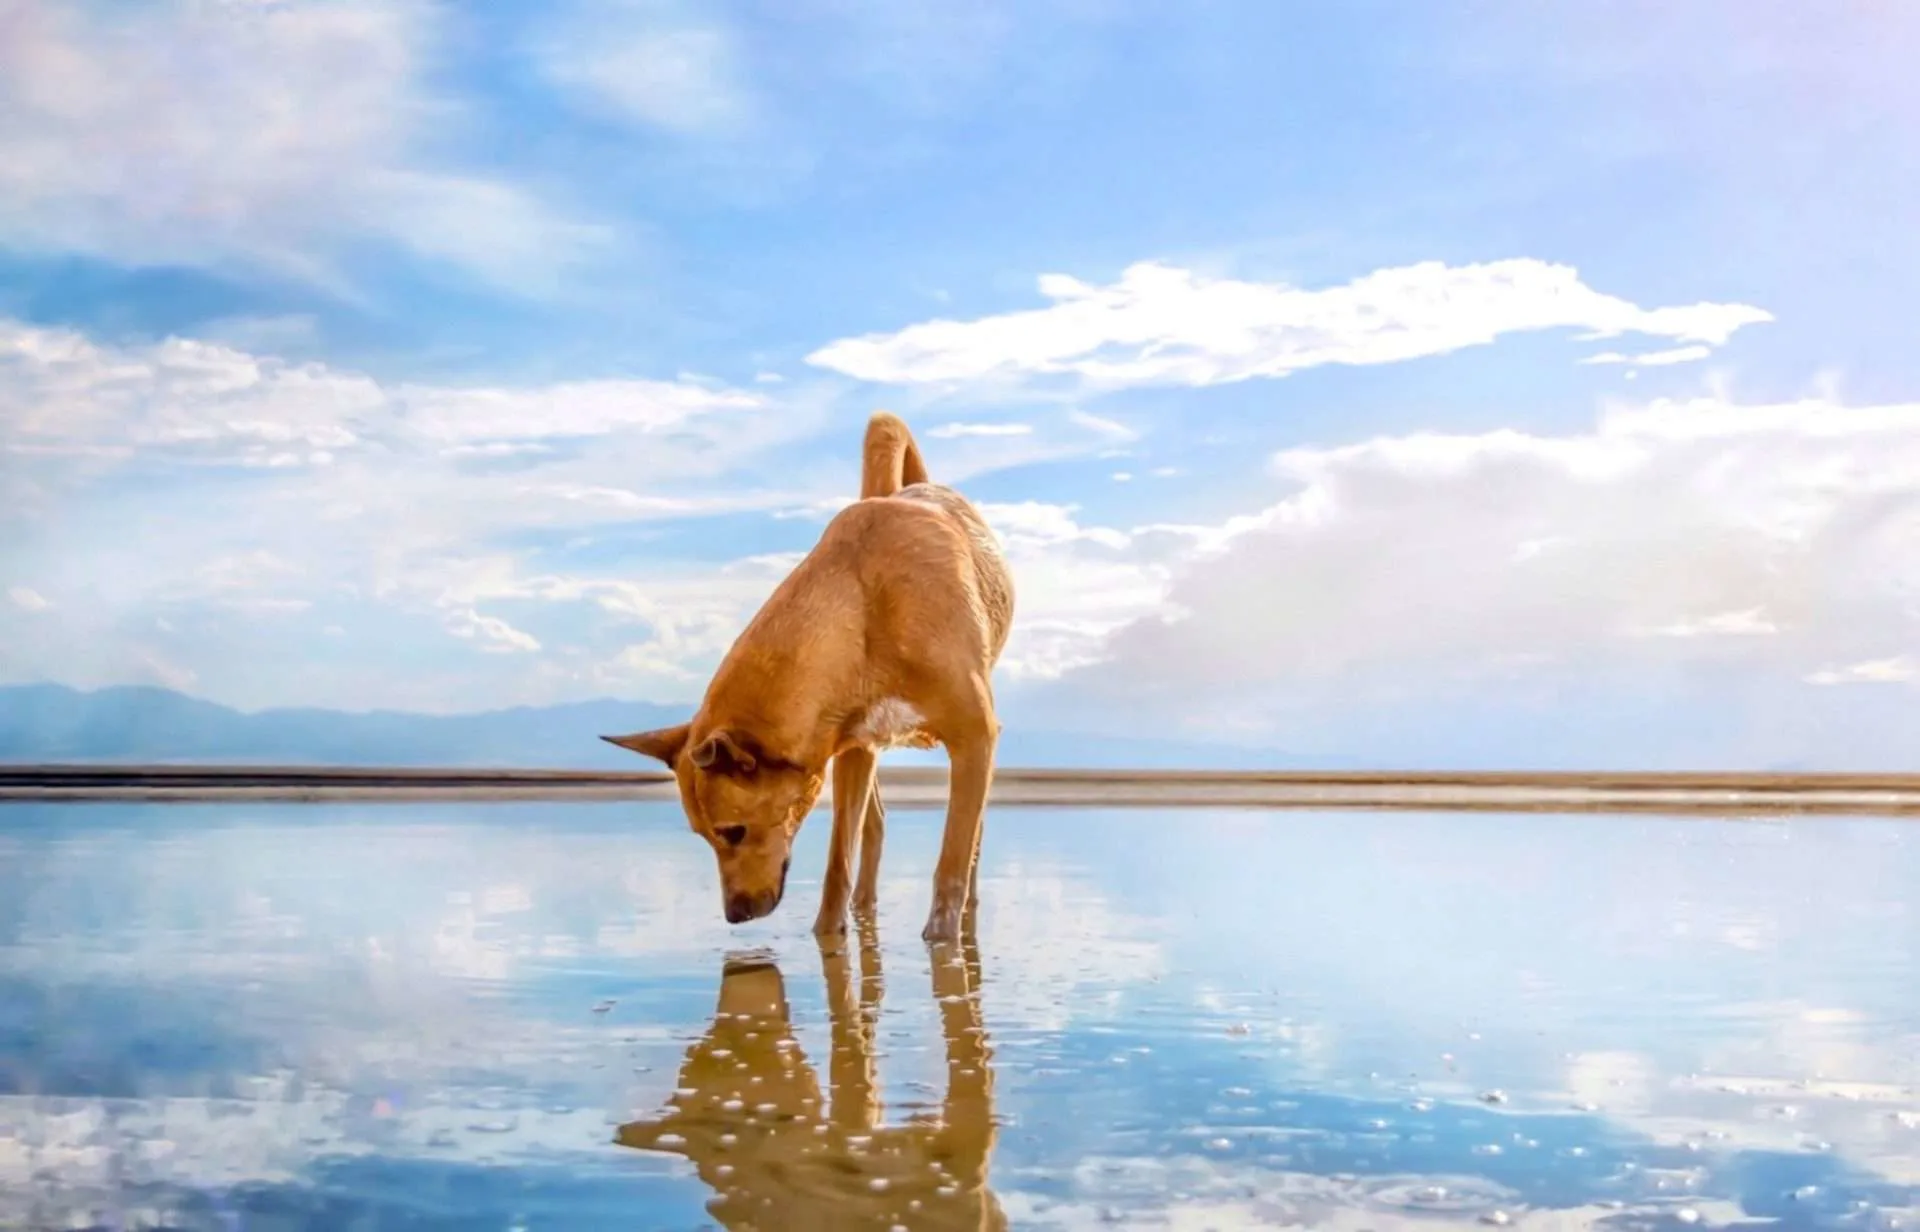 Dog sniffing around on the beach in front of the Great Salt Lake.